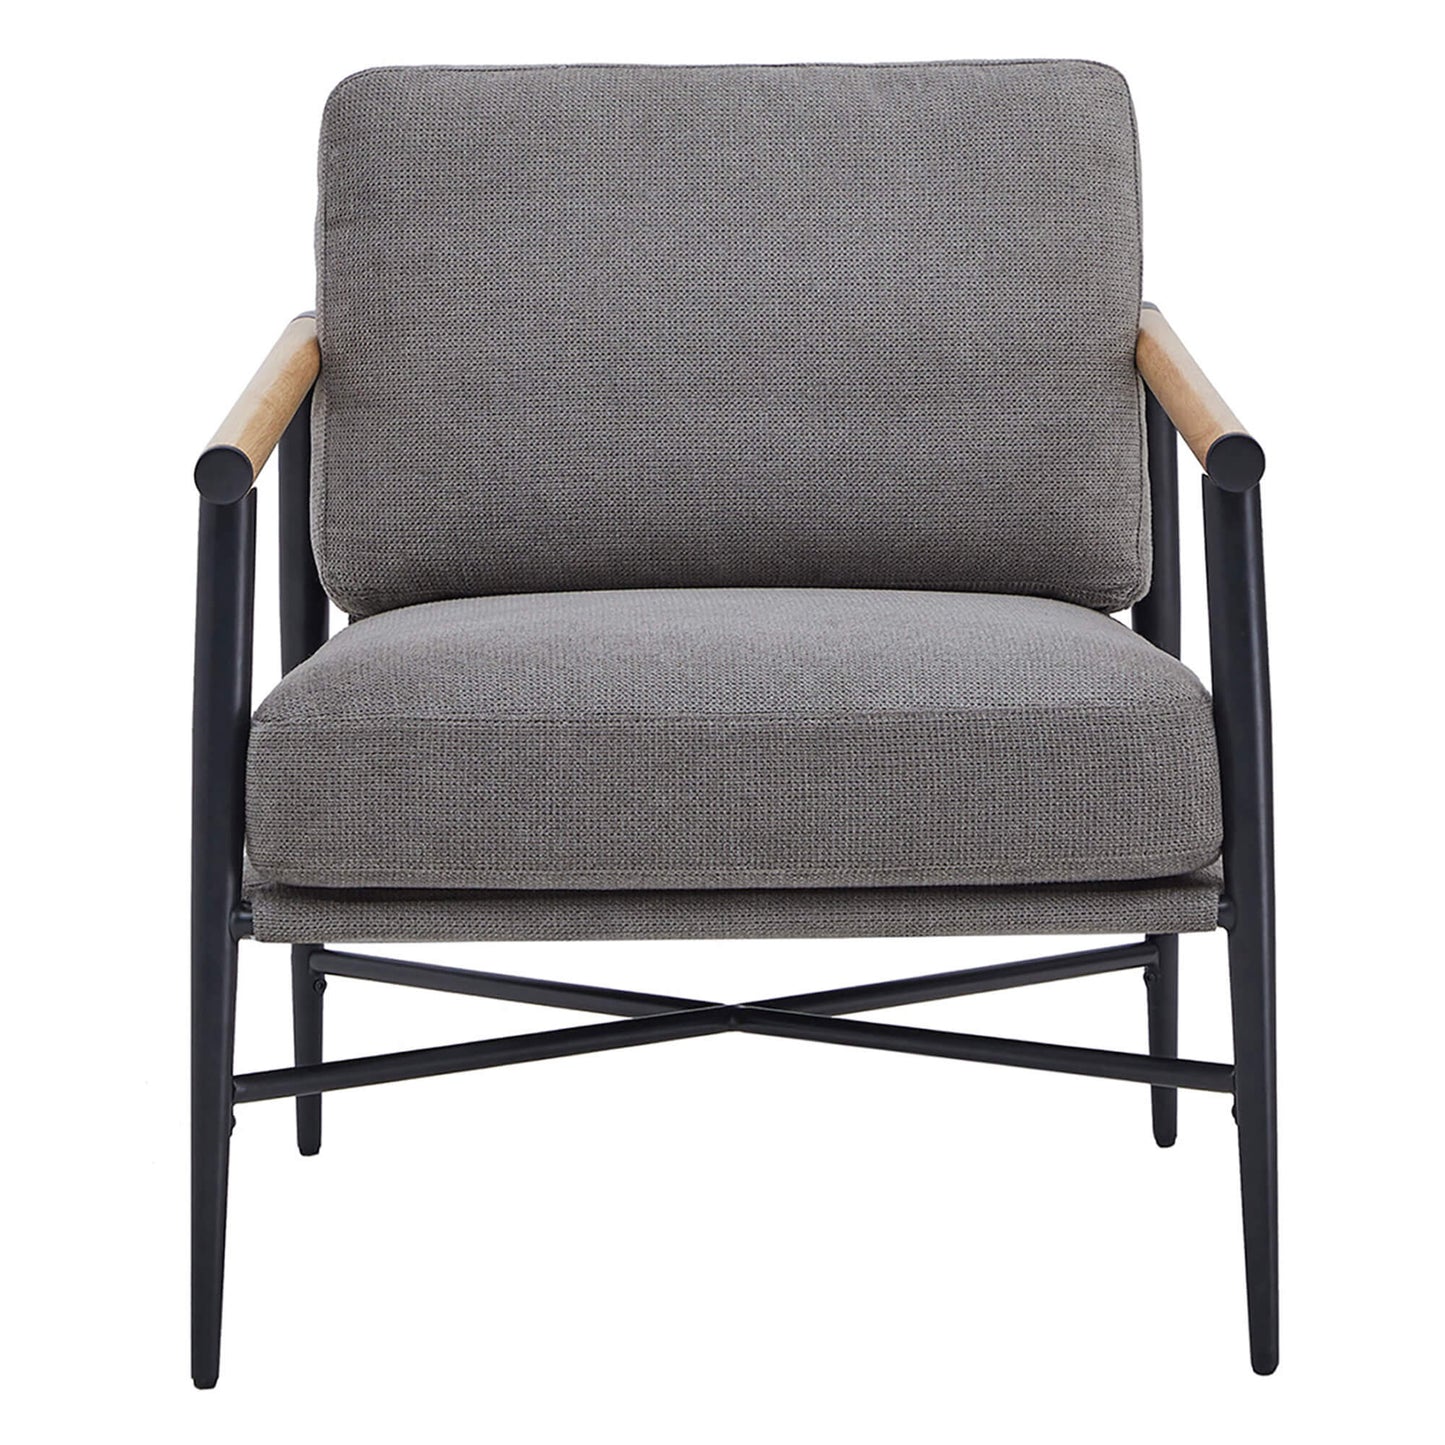 CHITA LIVING-Charlotte Modern Accent Chair-Accent Chair-Fabric-Gray-